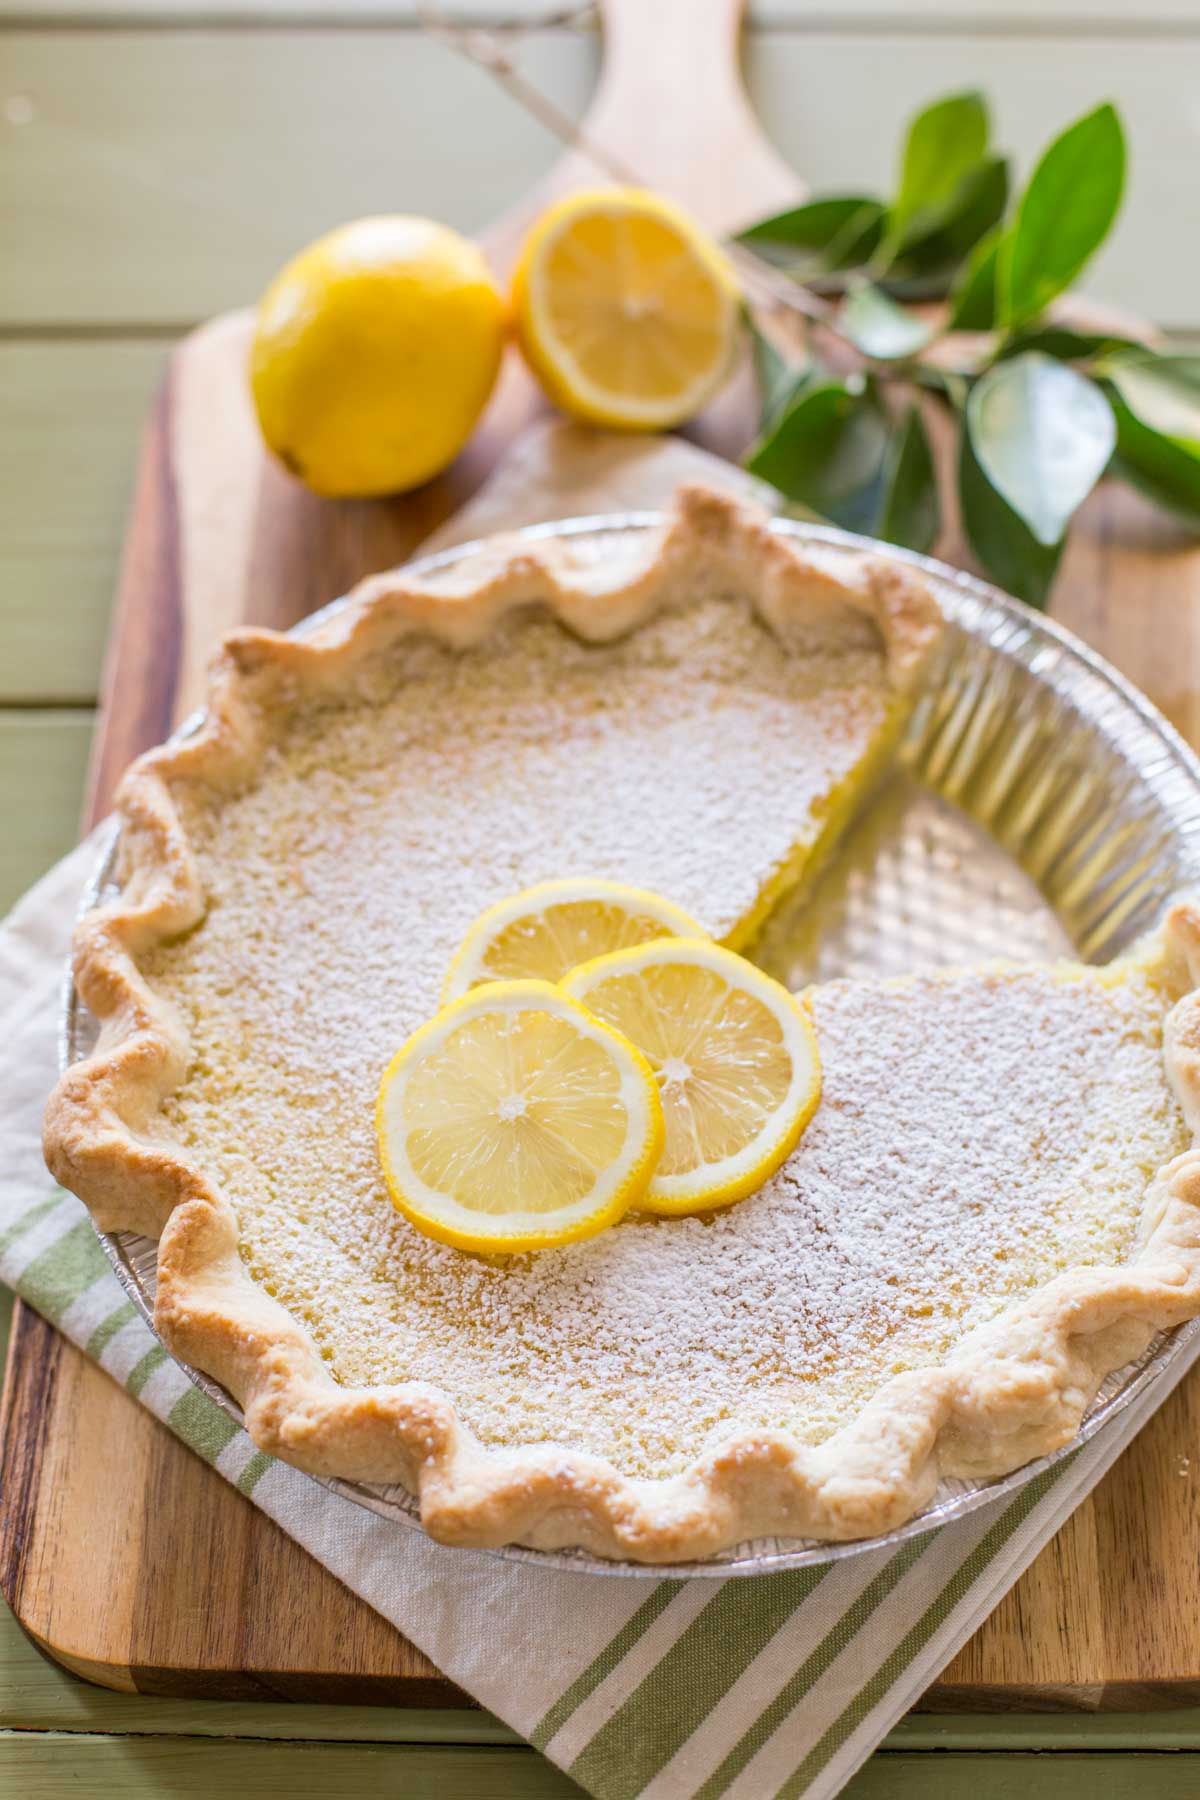 A Whole Lemon Pie dusted with powdered sugar and garnished with lemon slices, with one slice of pie missing, sitting on a cutting board with some lemons and tree leaves. 